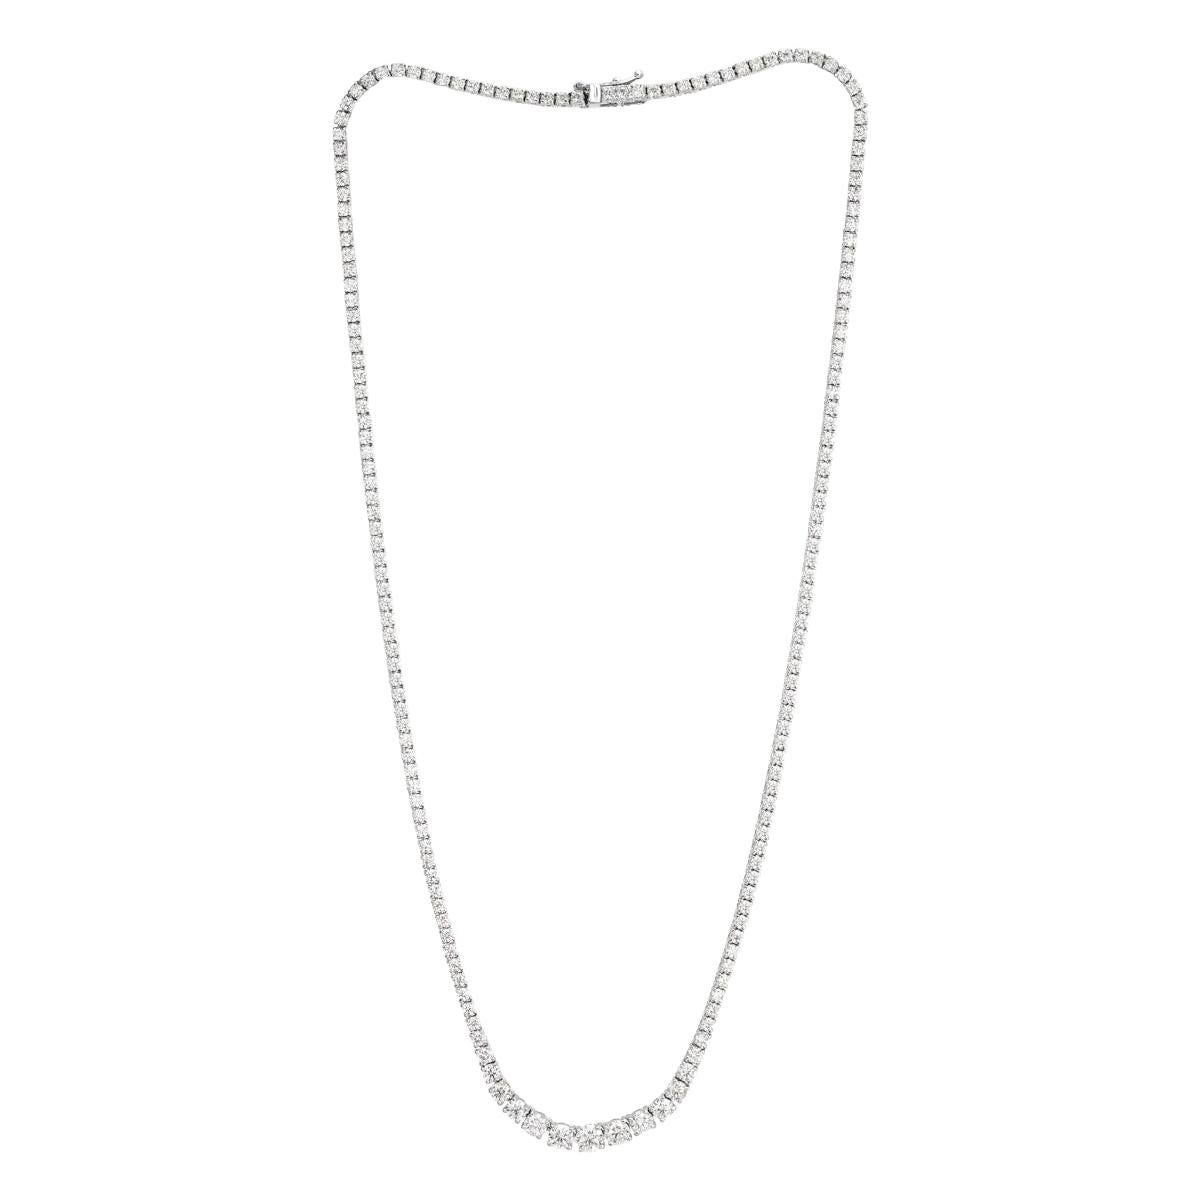 Mark Broumand 6.65 ct Round Brilliant Cut Diamond Tennis Necklace in 18k White For Sale